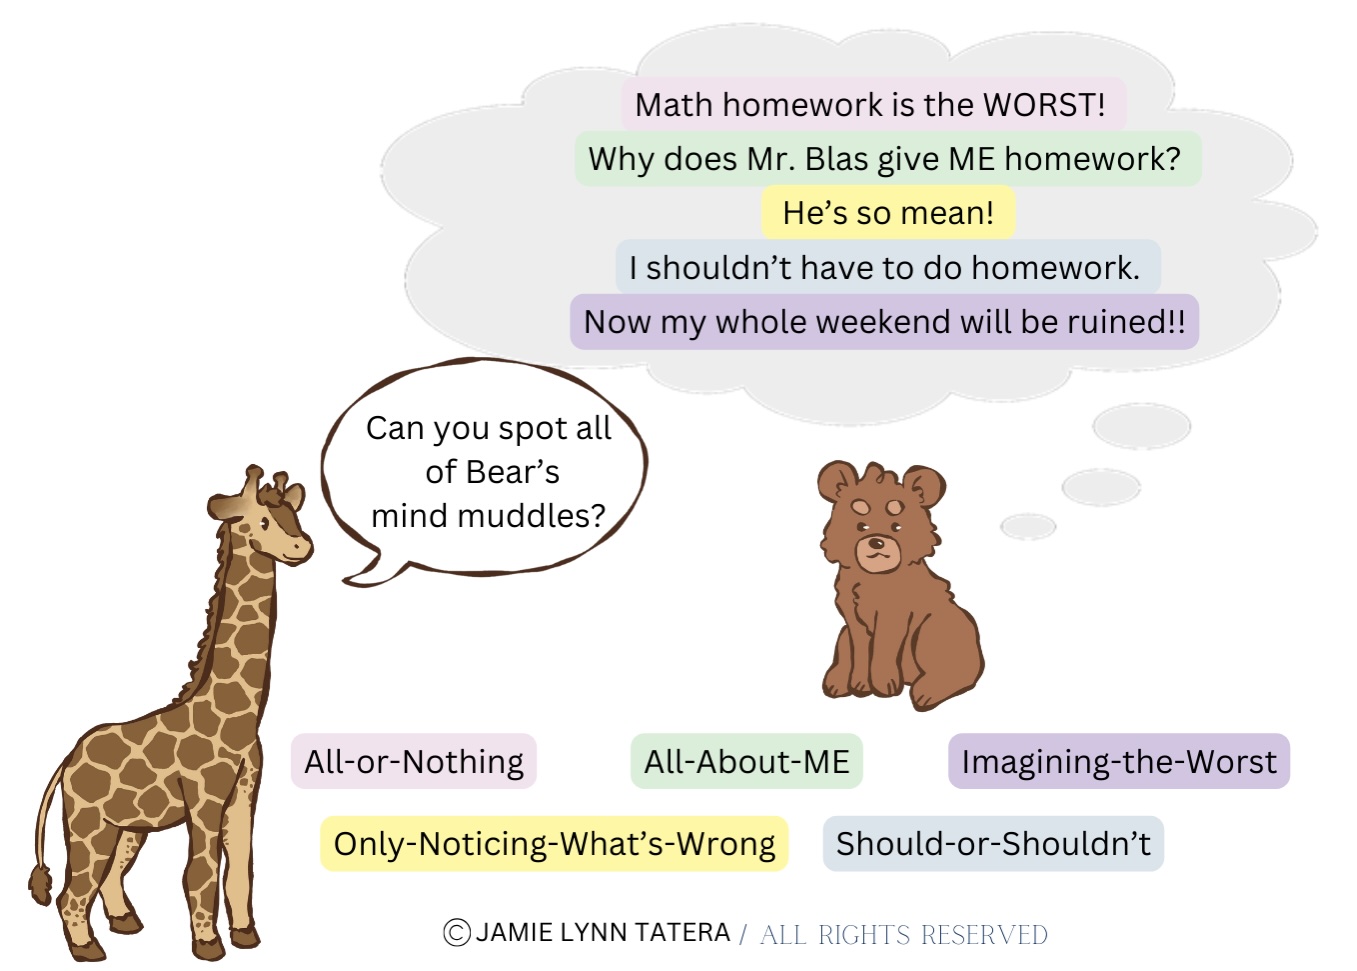 Illustration of Bear thinking 'Math homework is the WORST!' (all-or-nothing thinking), 'Why does Mr. Blas give ME homework?' (all-about-me thinking), 'He's so mean!' (only noticing what's wrong), 'I shouldn't have to do homework' (should or shouldn't thinking), and 'Now my whole weekend will be ruined!!' (imagining the worst). Spots the giraffe stands to the side.